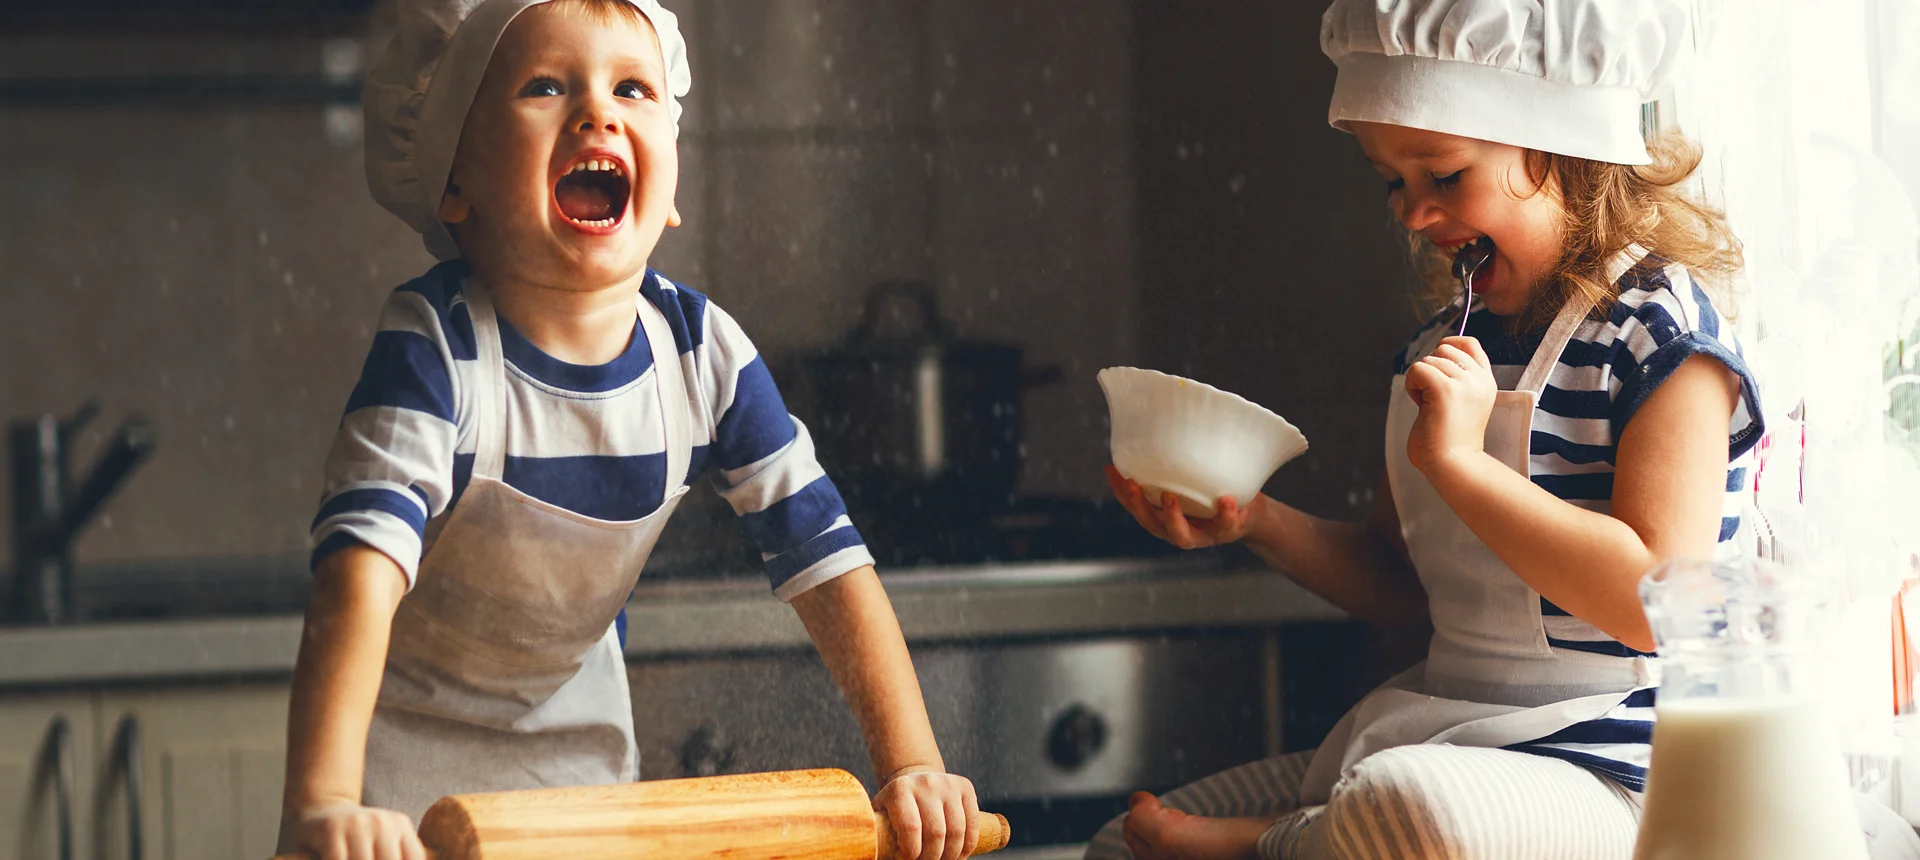 Photo of 2 young children baking